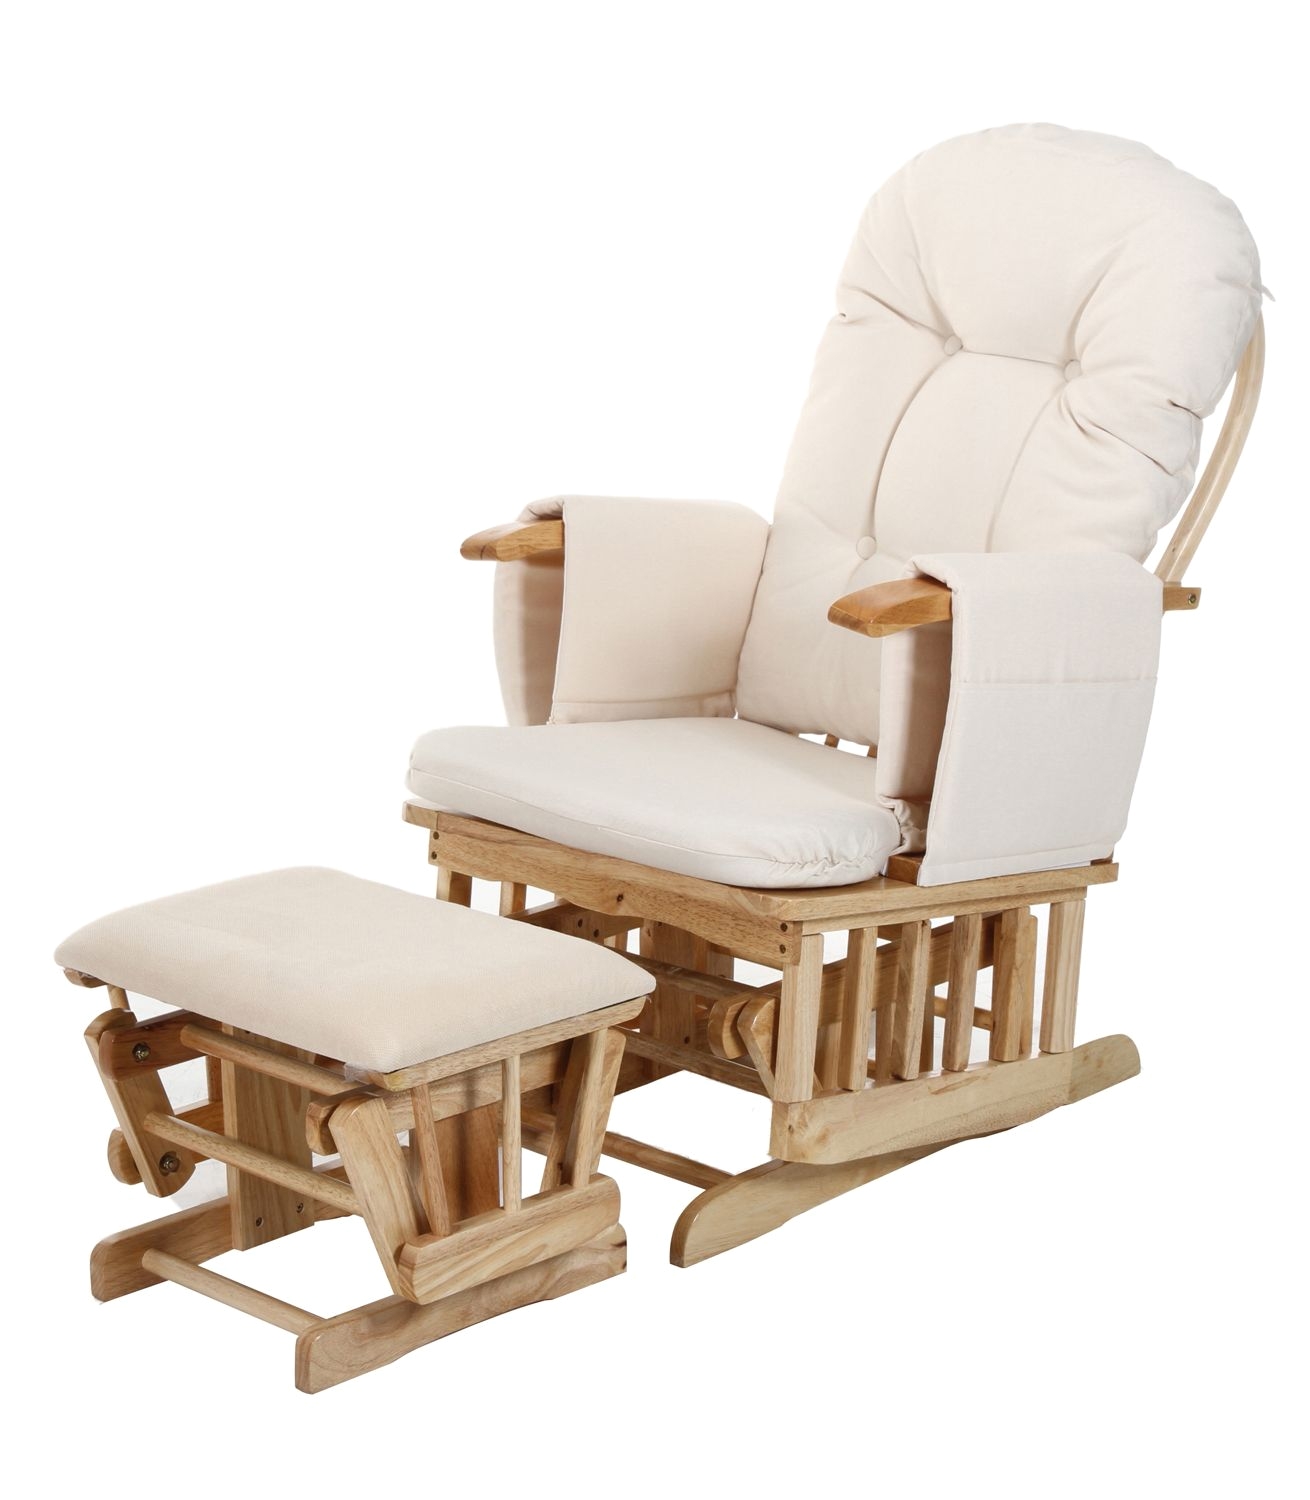 Toys R Us Childrens Rocking Chairs Buy Your Baby Weavers Recline Glider Stool From Kiddicare Nursing